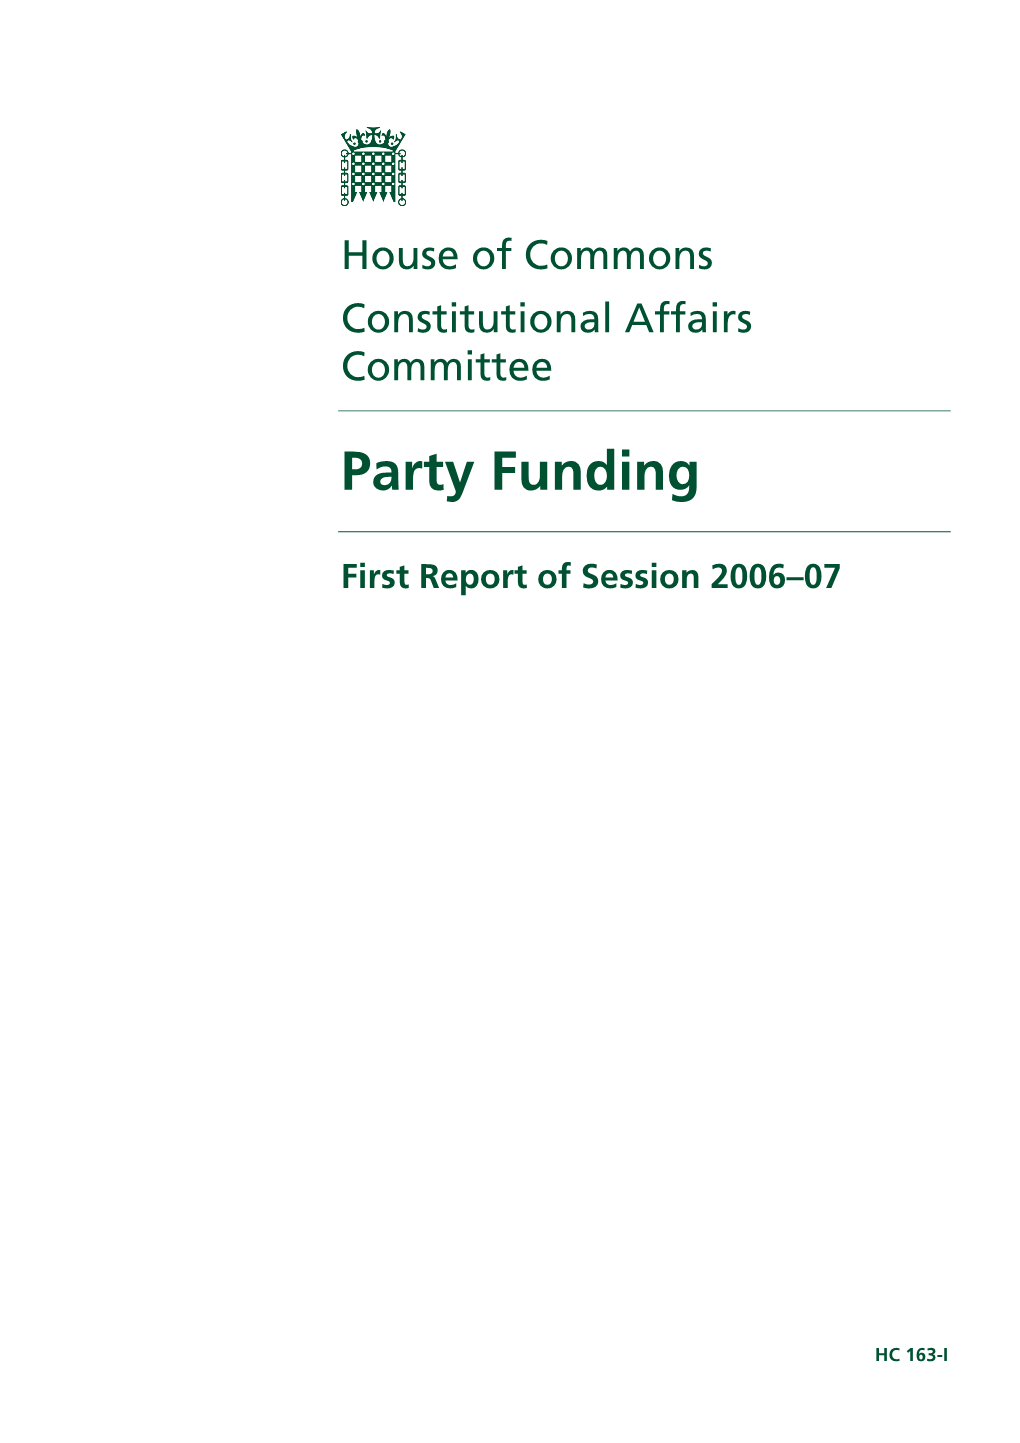 Party Funding